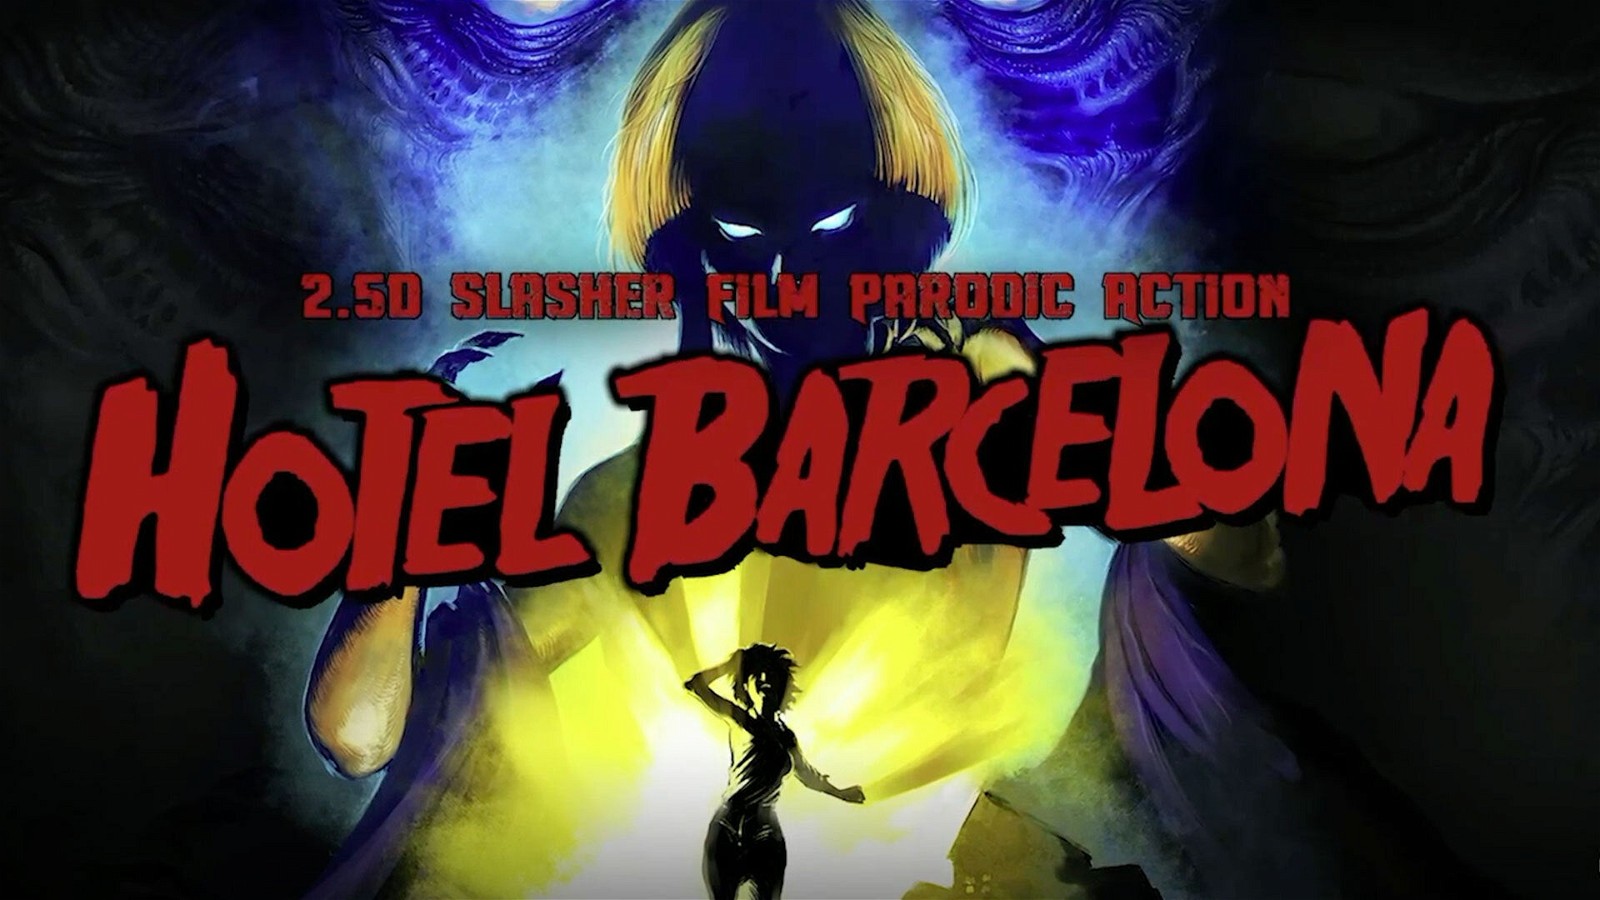 Suda51's next game, Hotel Barcelona, is a wild and wacky 2.5D slasher.